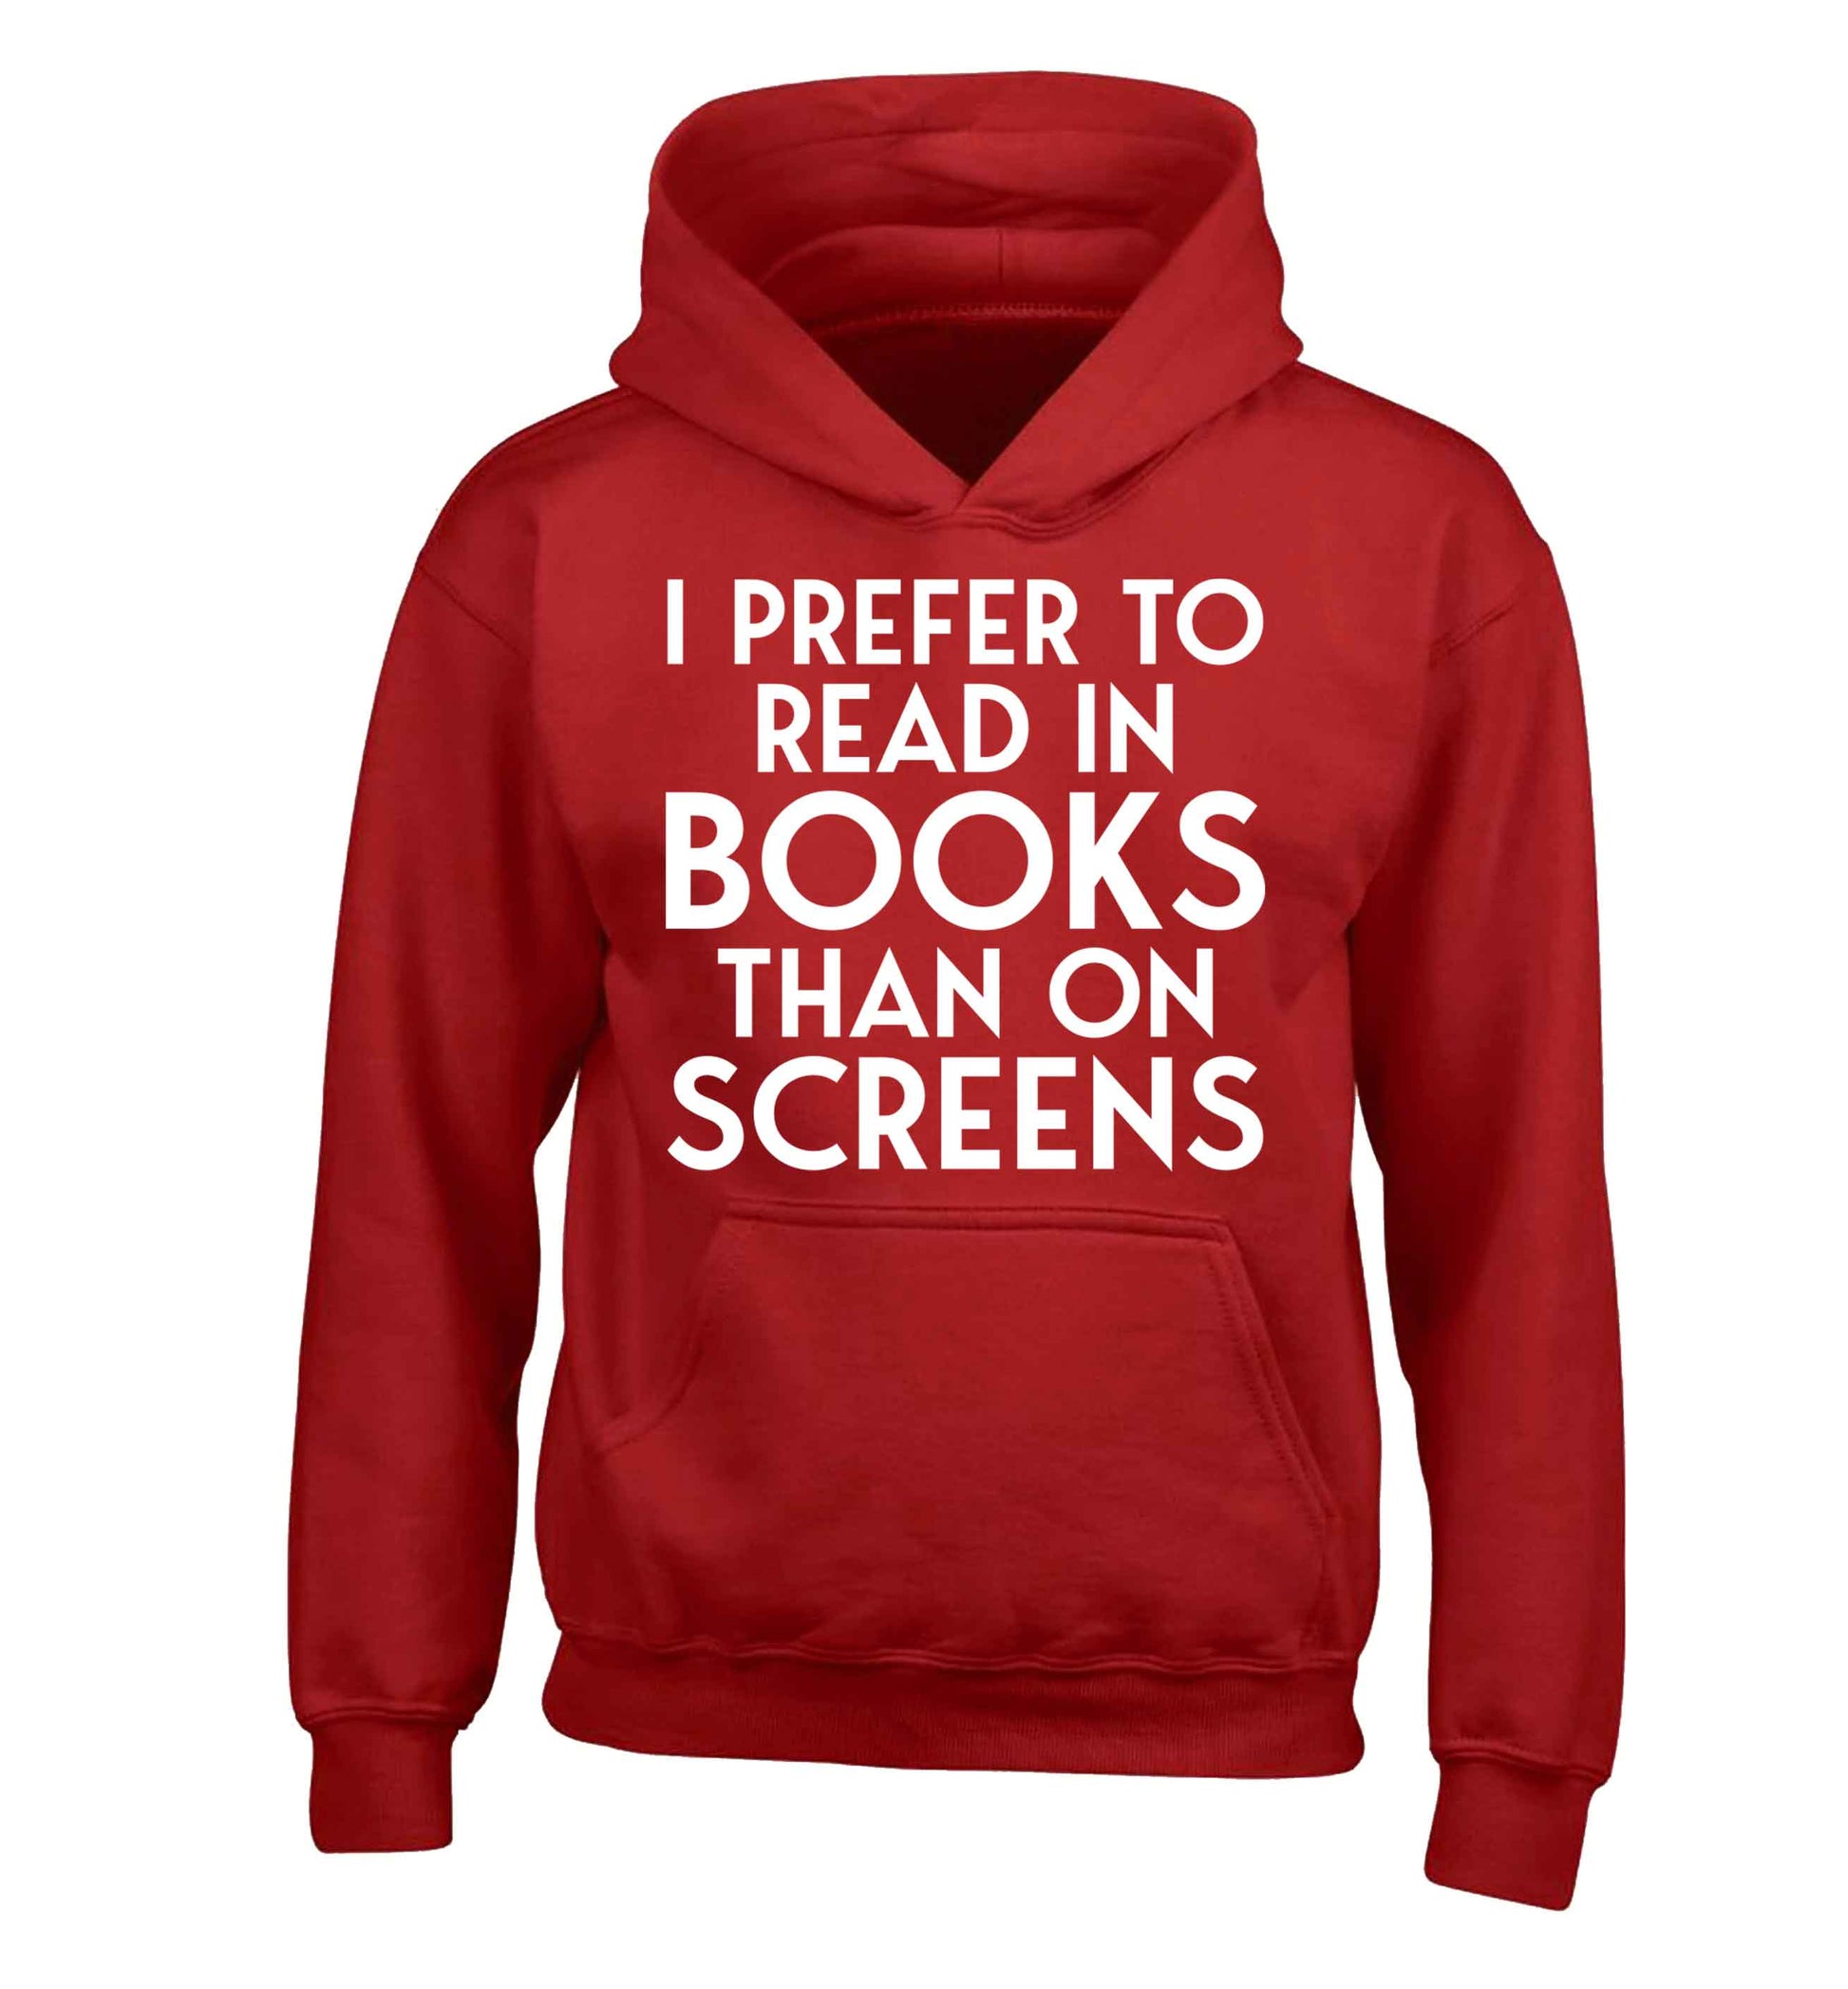 I prefer to read in books than on screens children's red hoodie 12-13 Years